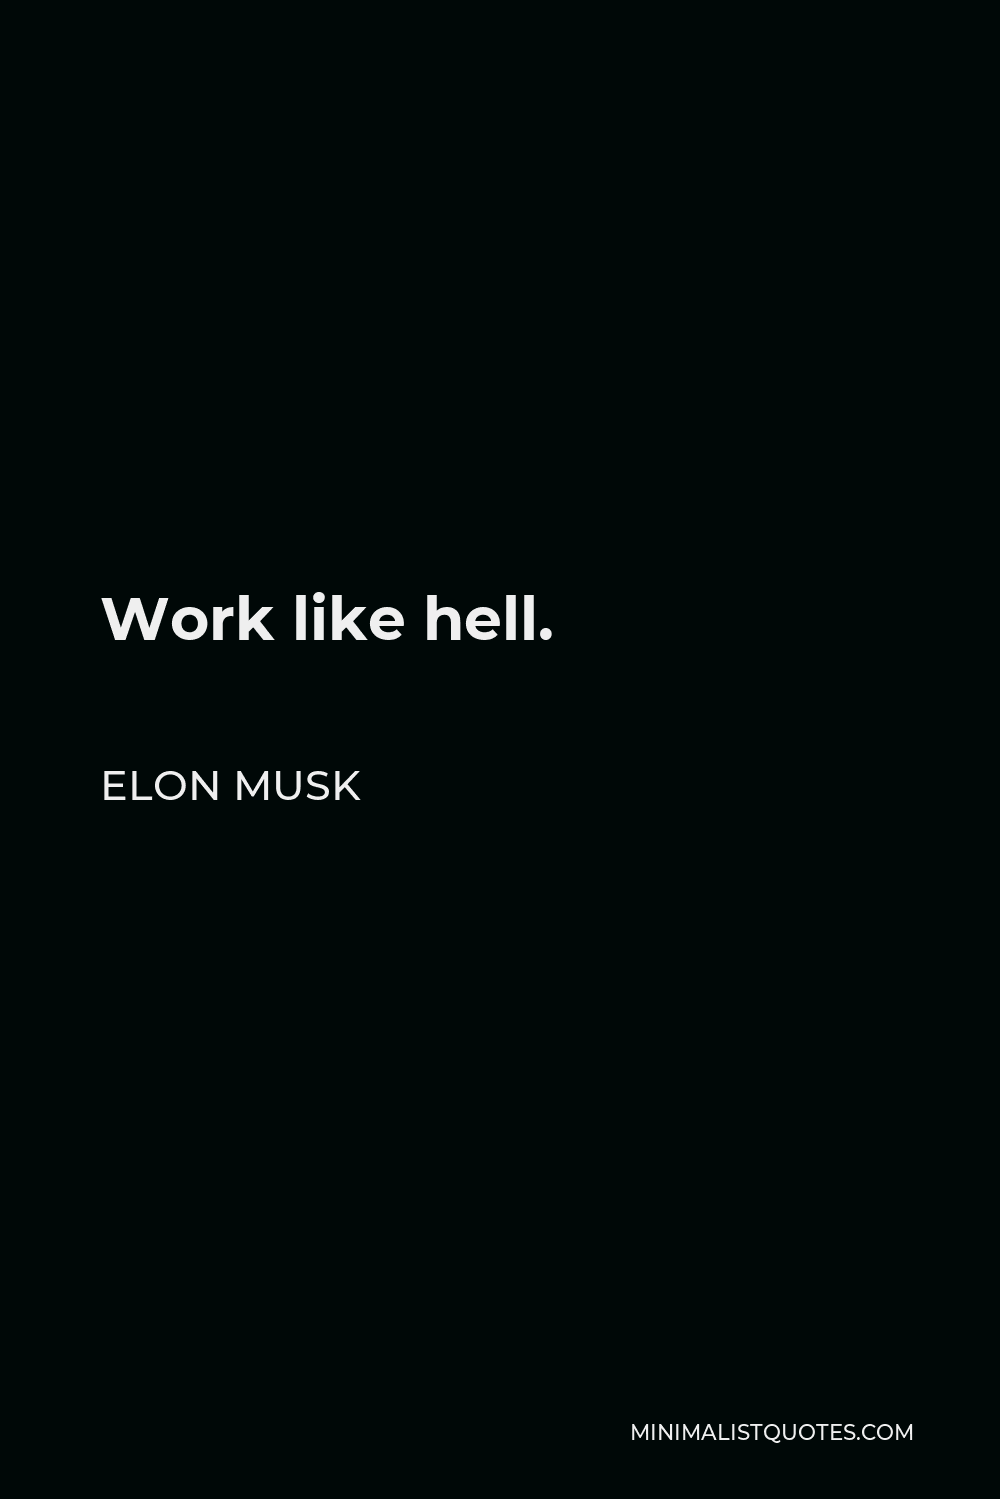 Elon Musk Quote Work like hell Elon musk quotes Astronomy